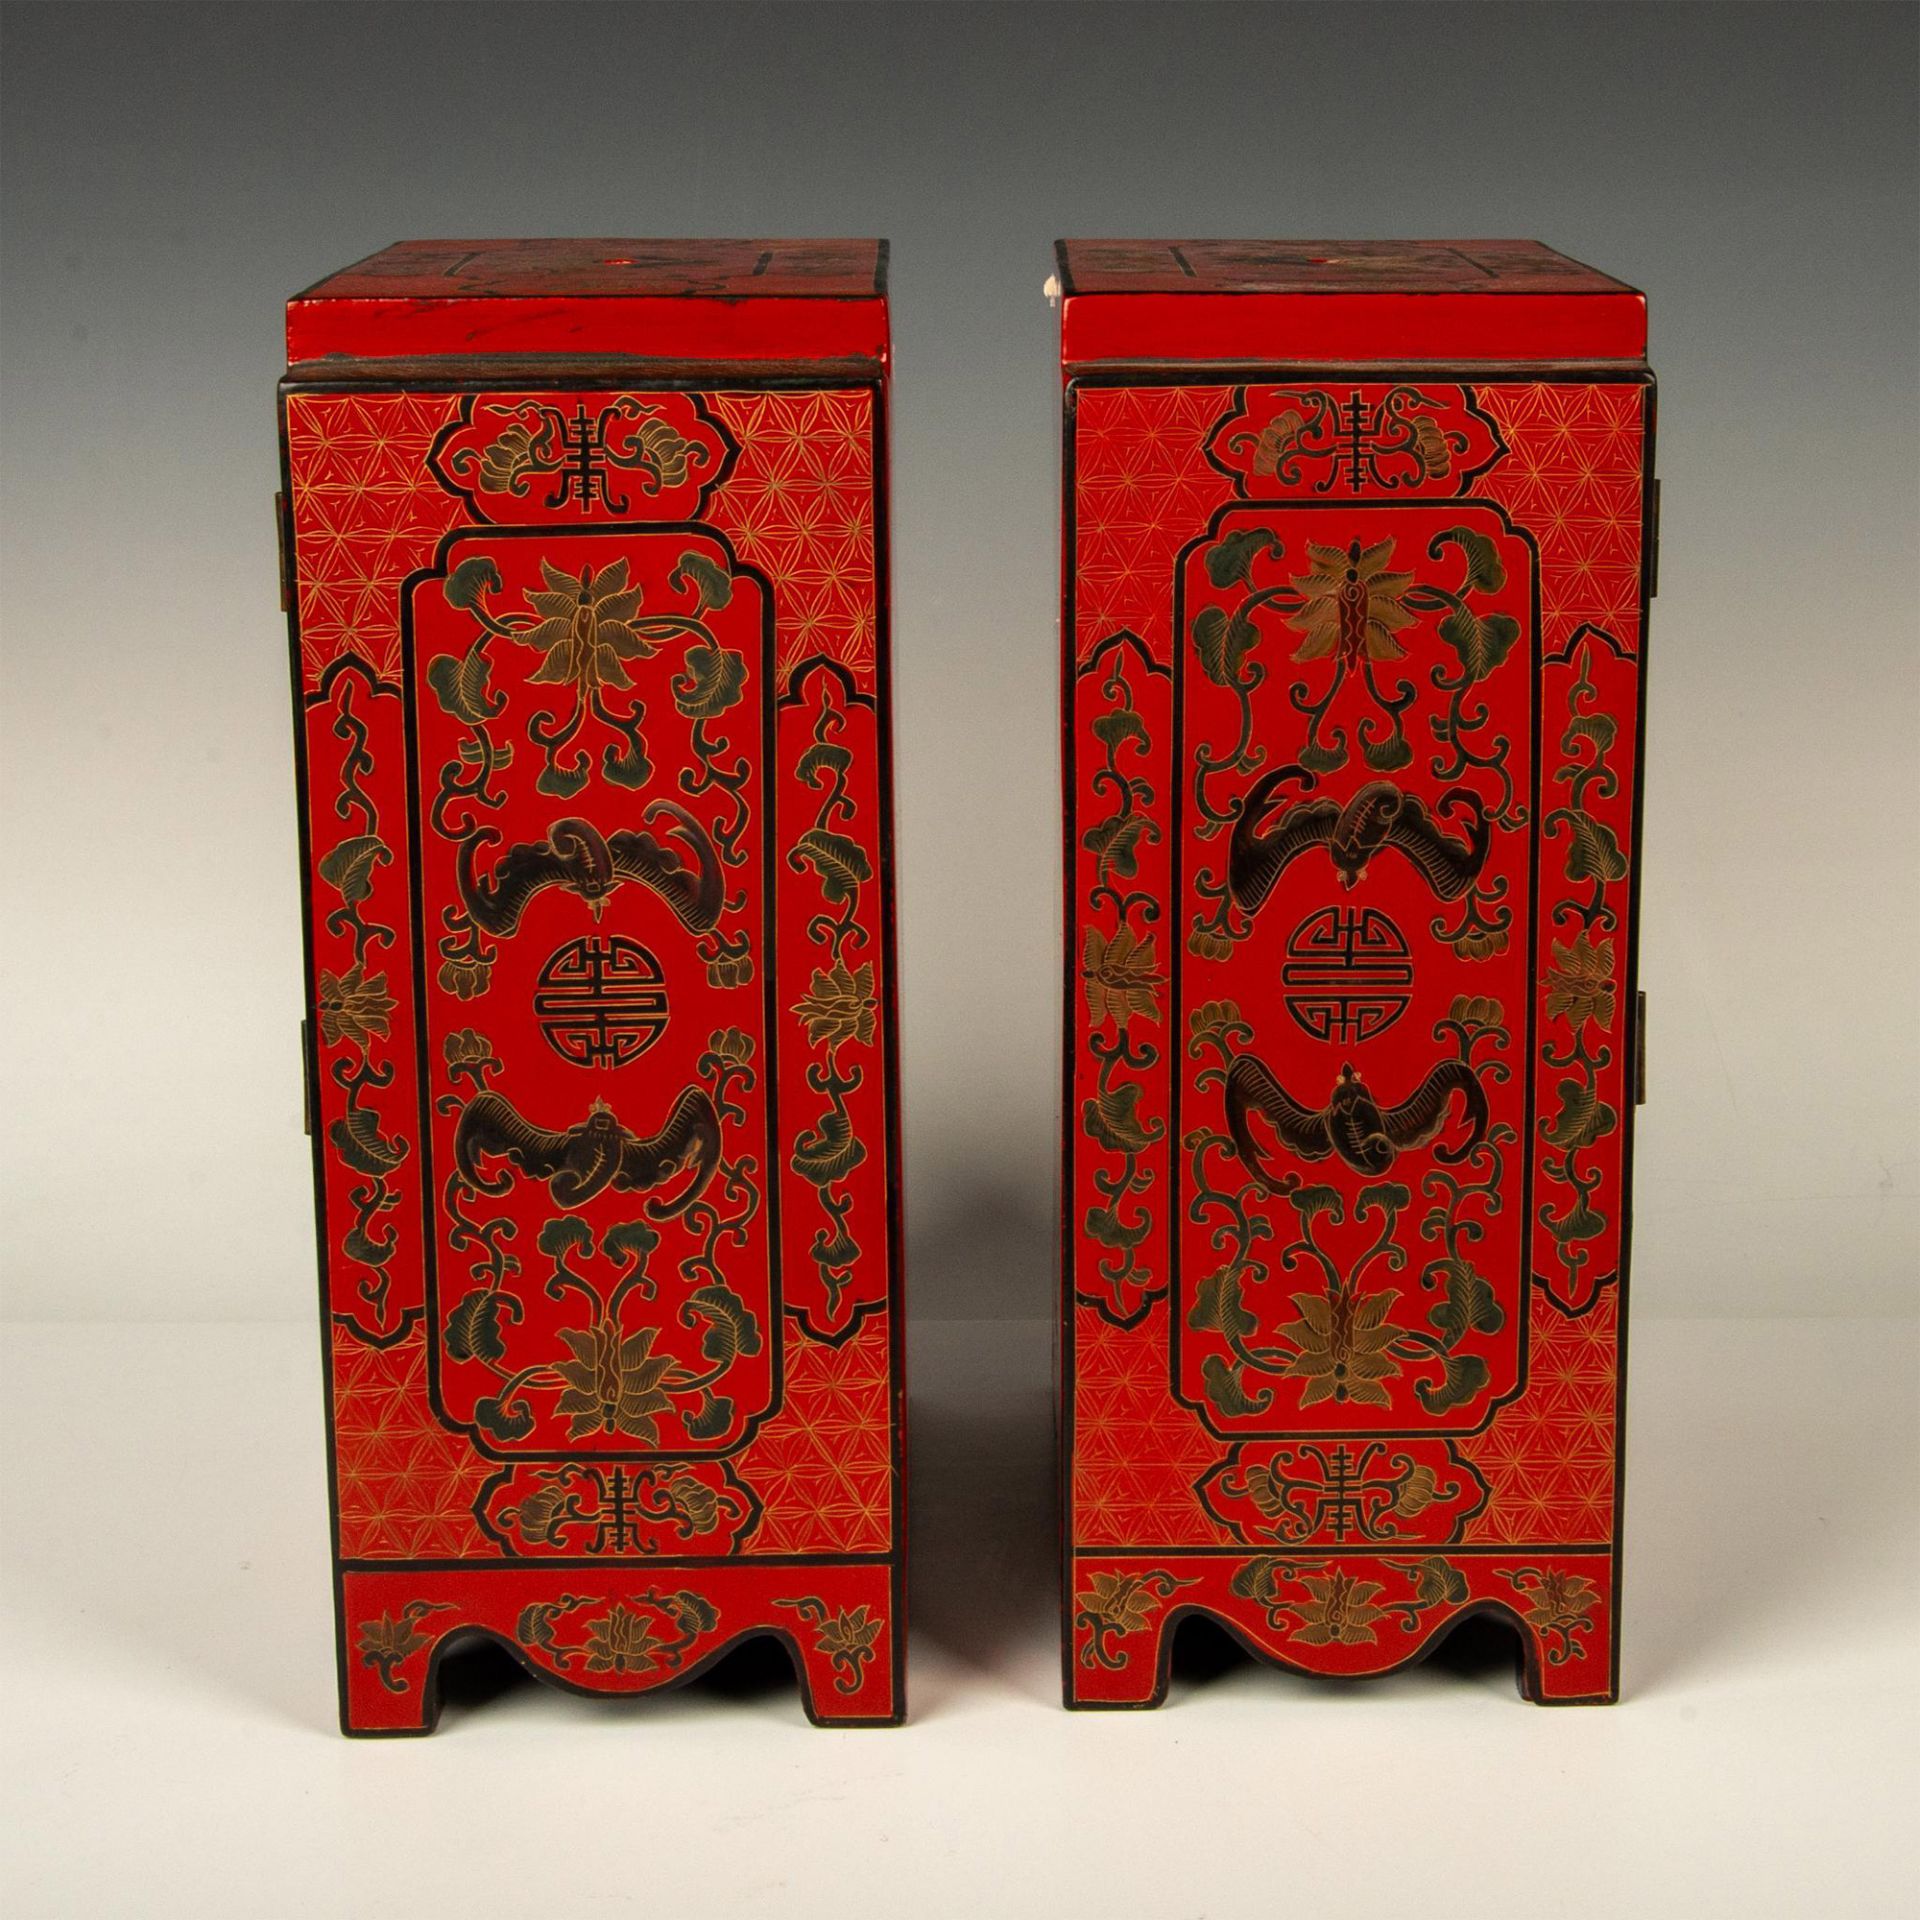 Pair of Antique Chinese Lacquer Cabinets - Image 4 of 6